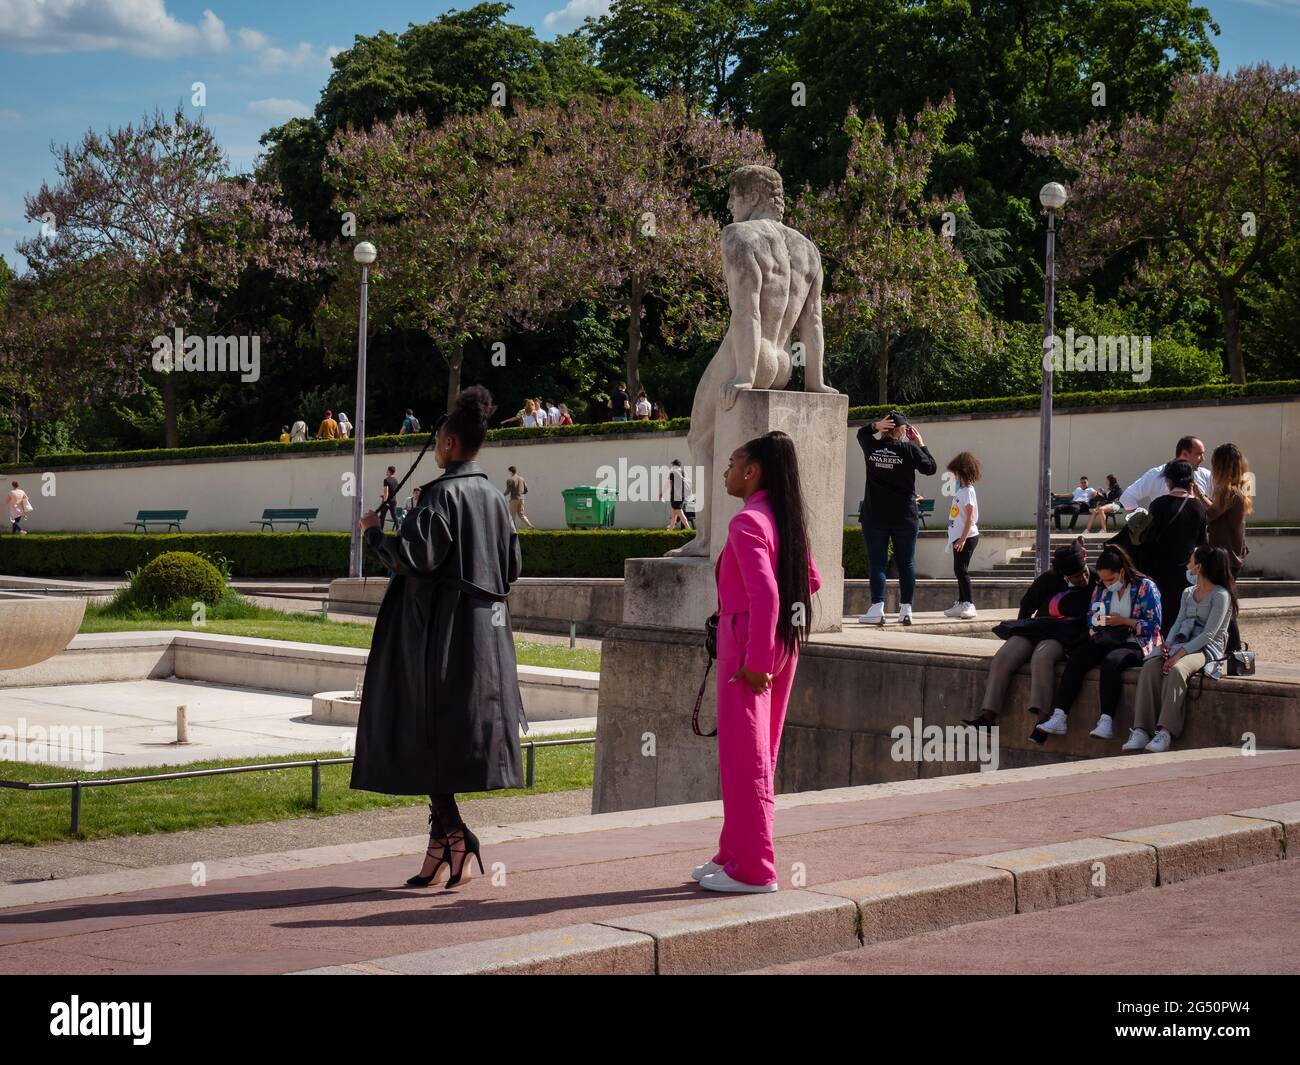 Paris, France, May 2021. Two black beautiful women taking photos, a photo session, a woman in a pink costume. Trocadero square sculpture in the backgr Stock Photo